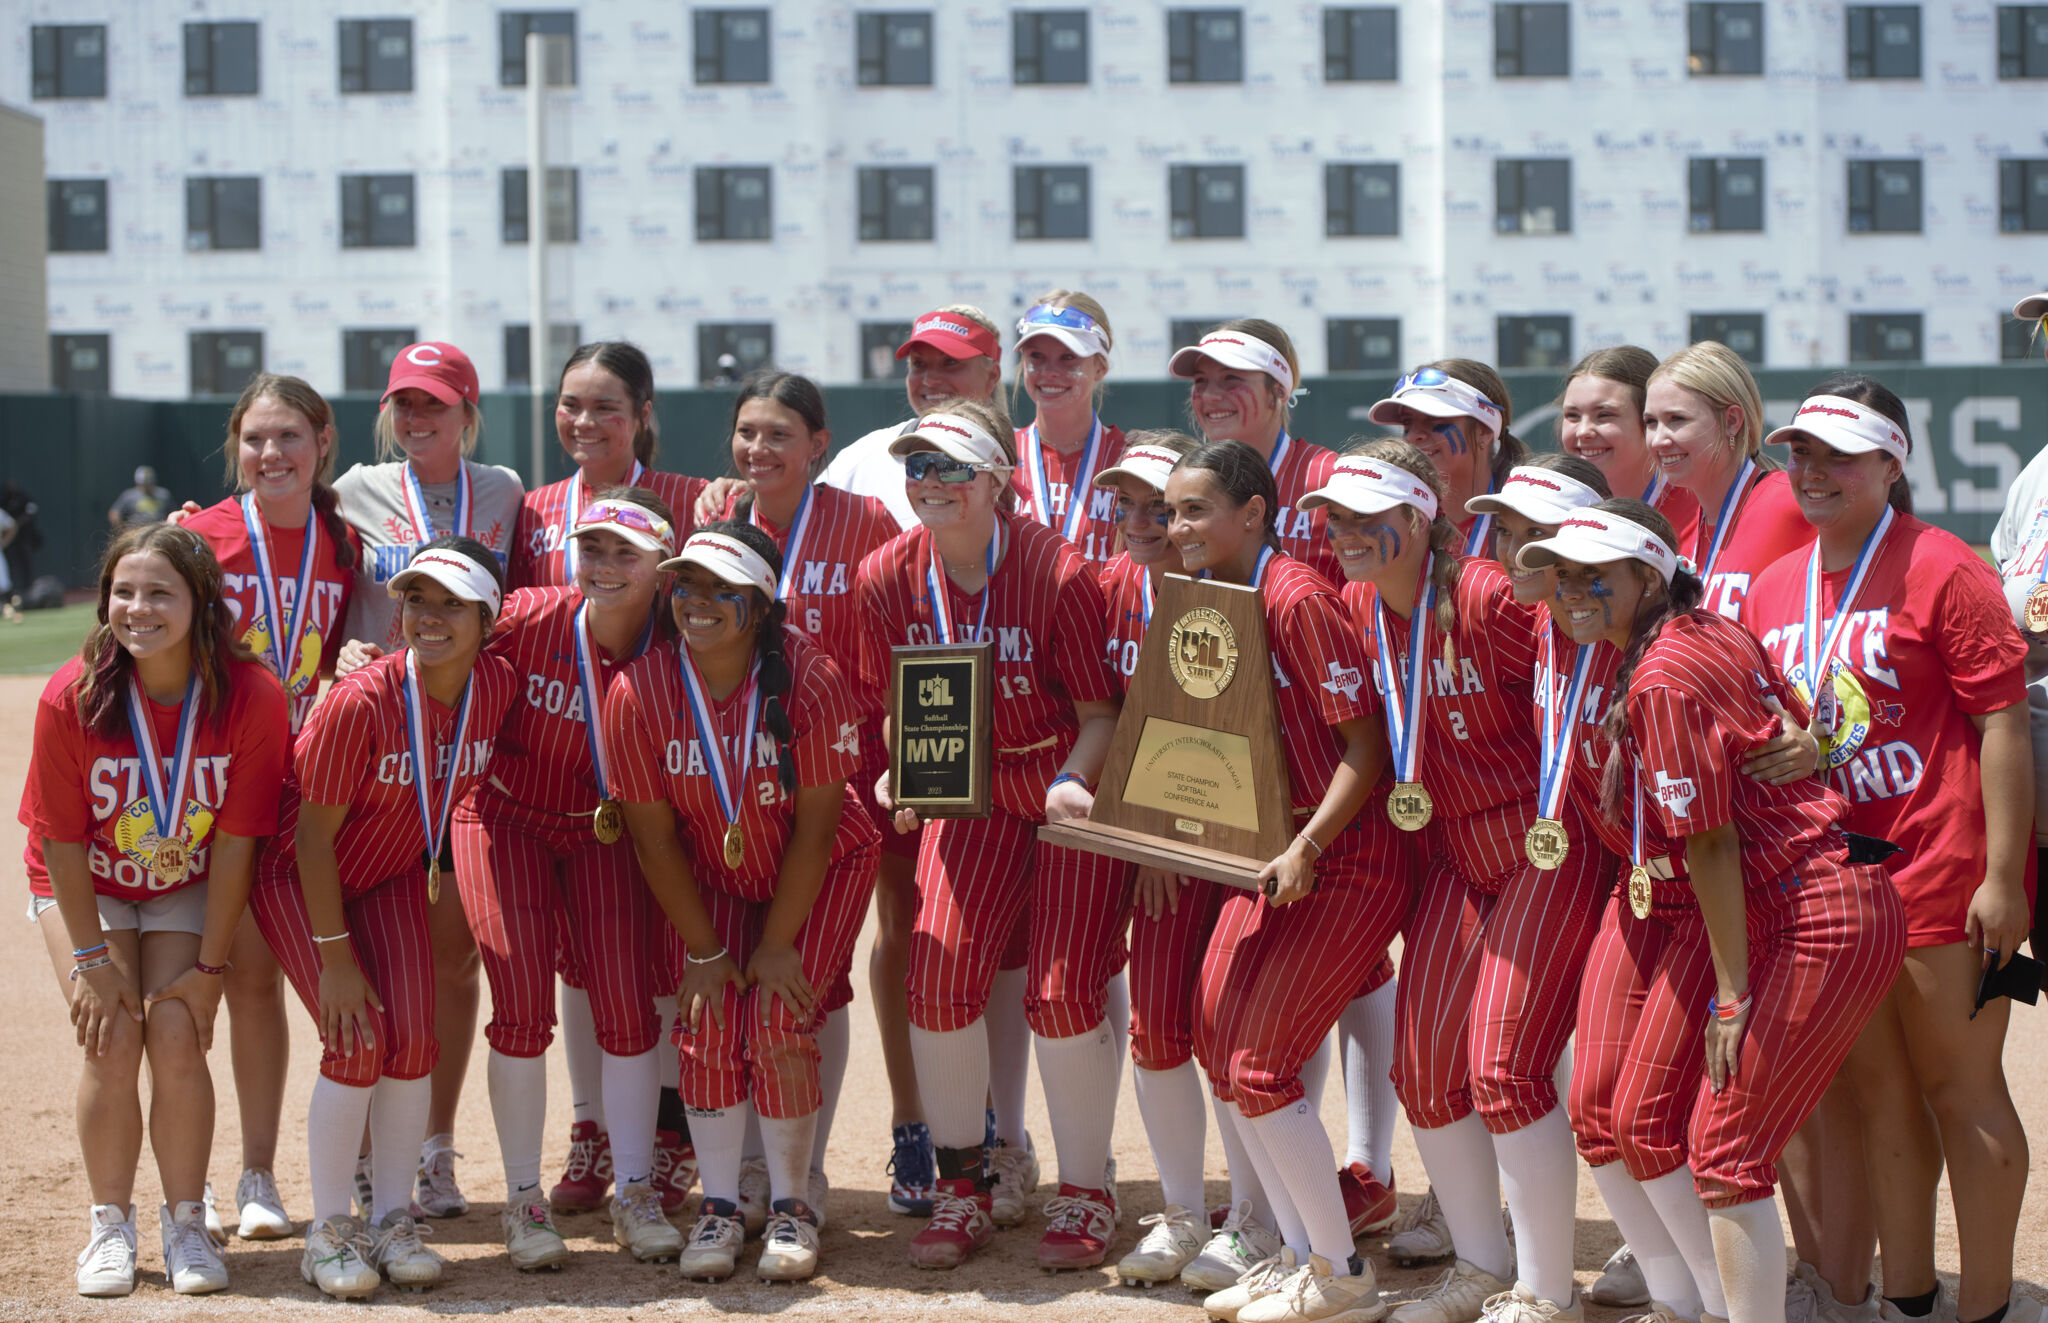 Wells’ MVP performance leads Coahoma to state title